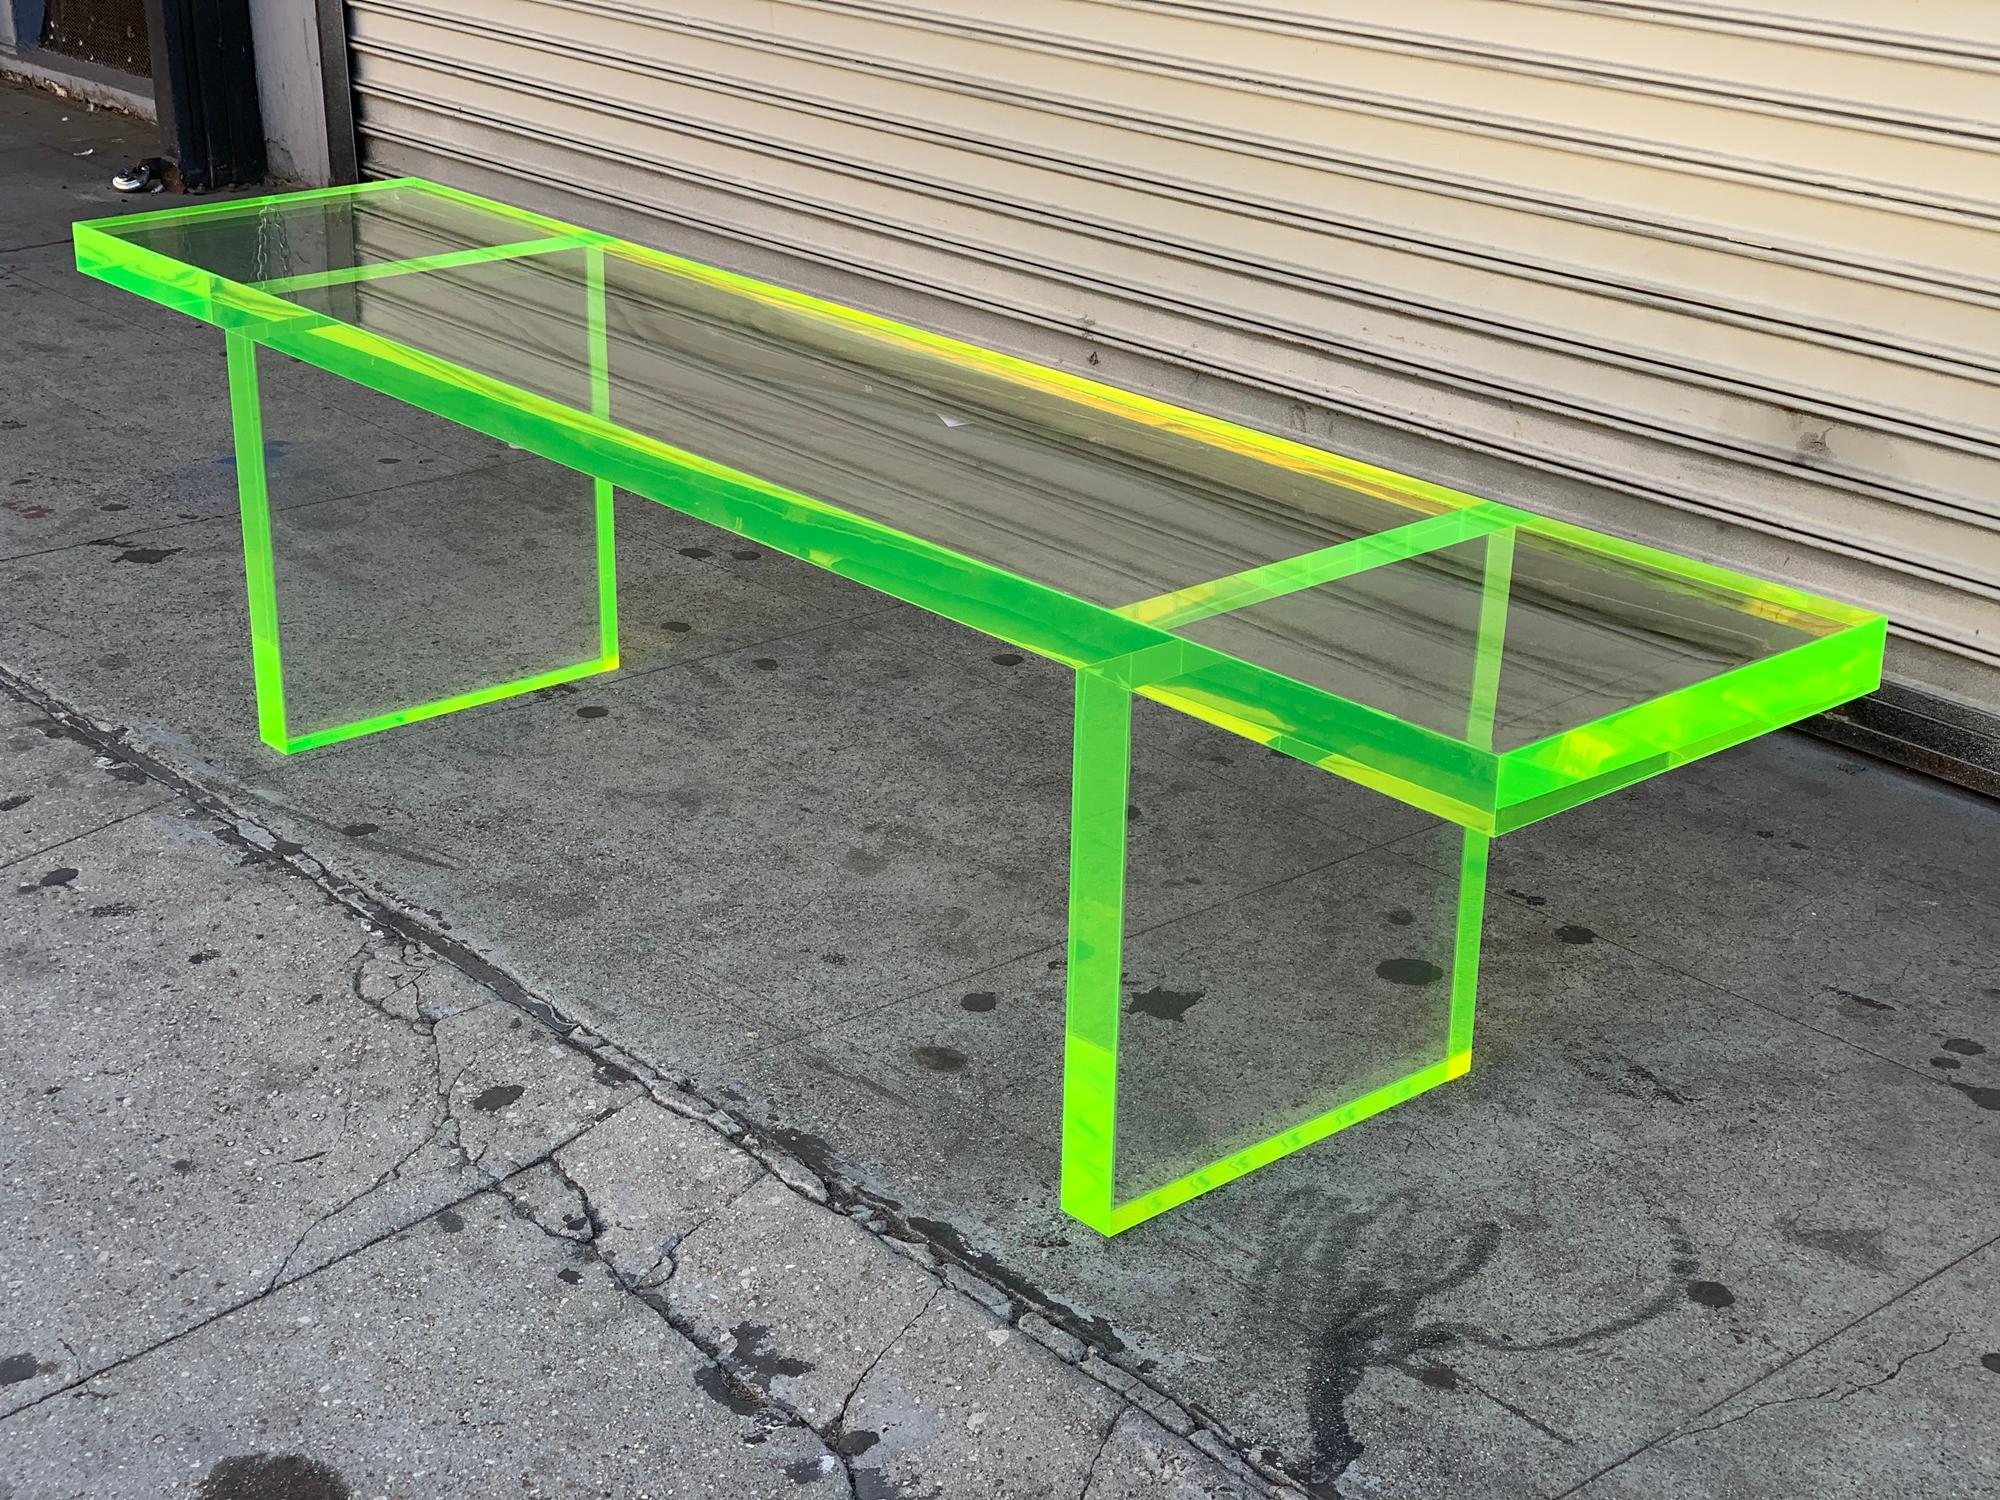 Introducing the Fluorescent Green & Clear Lucite Bench by Amparo Calderon Tapia, a stunning addition to any contemporary living space. Crafted from high-quality Lucite material, this bench is handcrafted using a 2 inches thick clear Lucite and